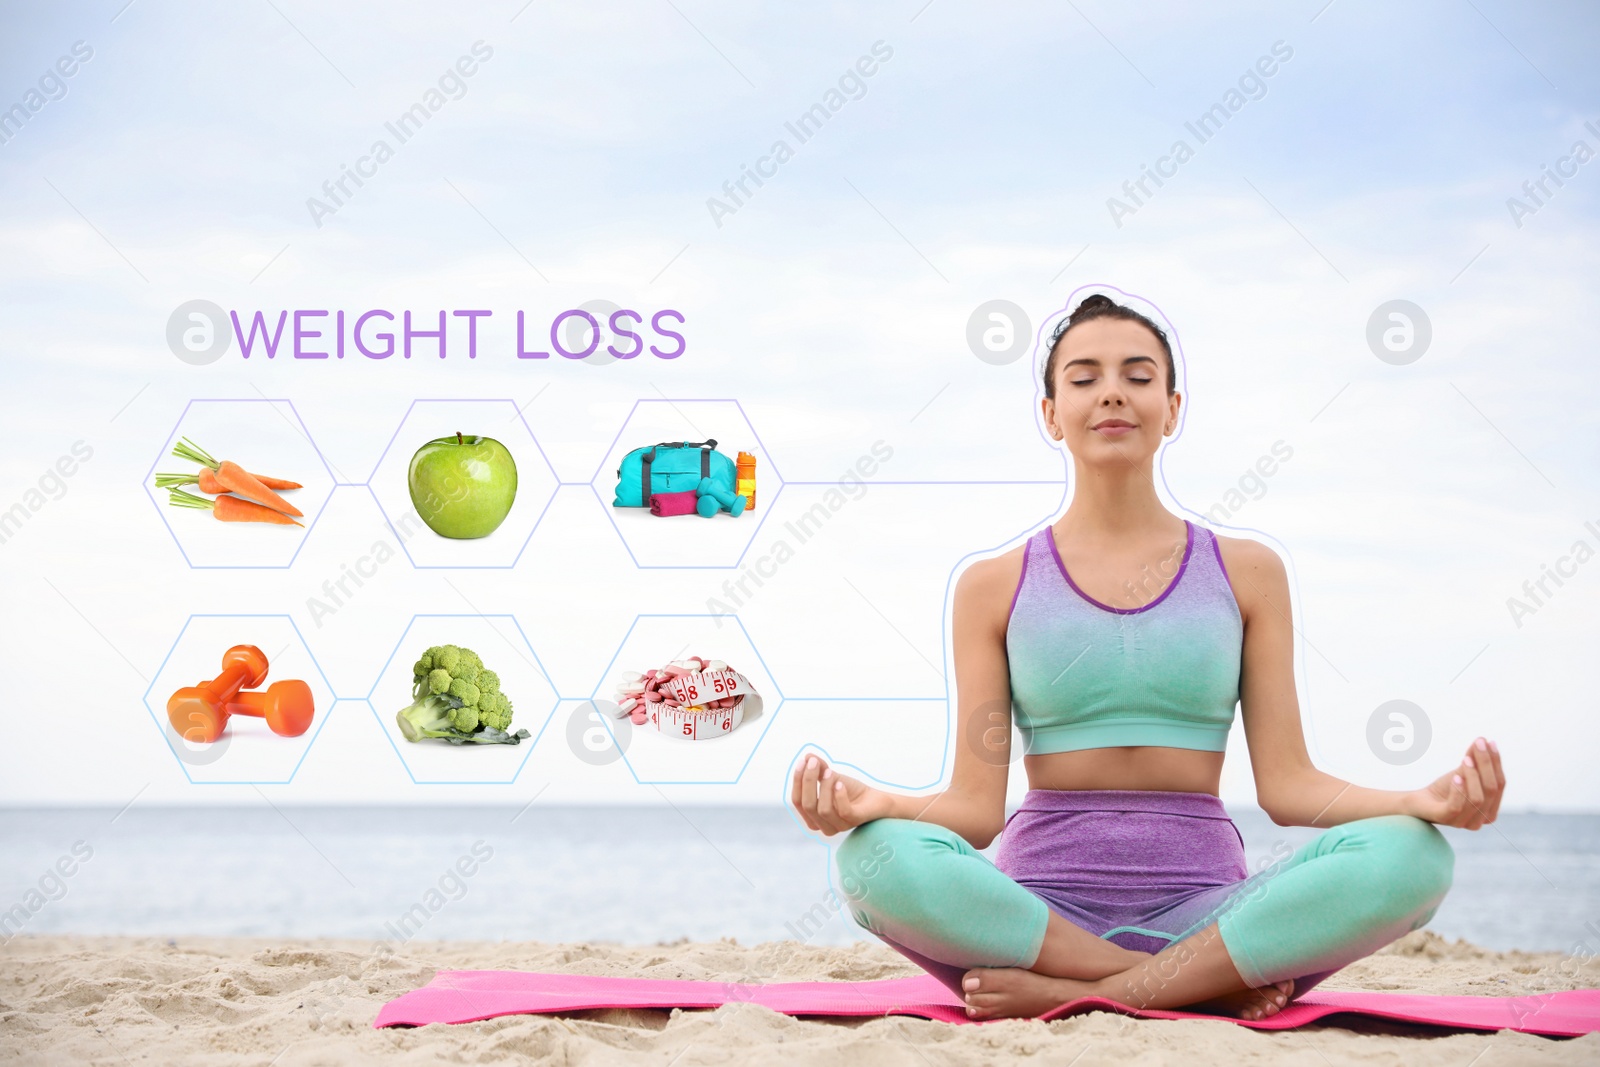 Image of Weight loss concept. Young woman practicing yoga on beach